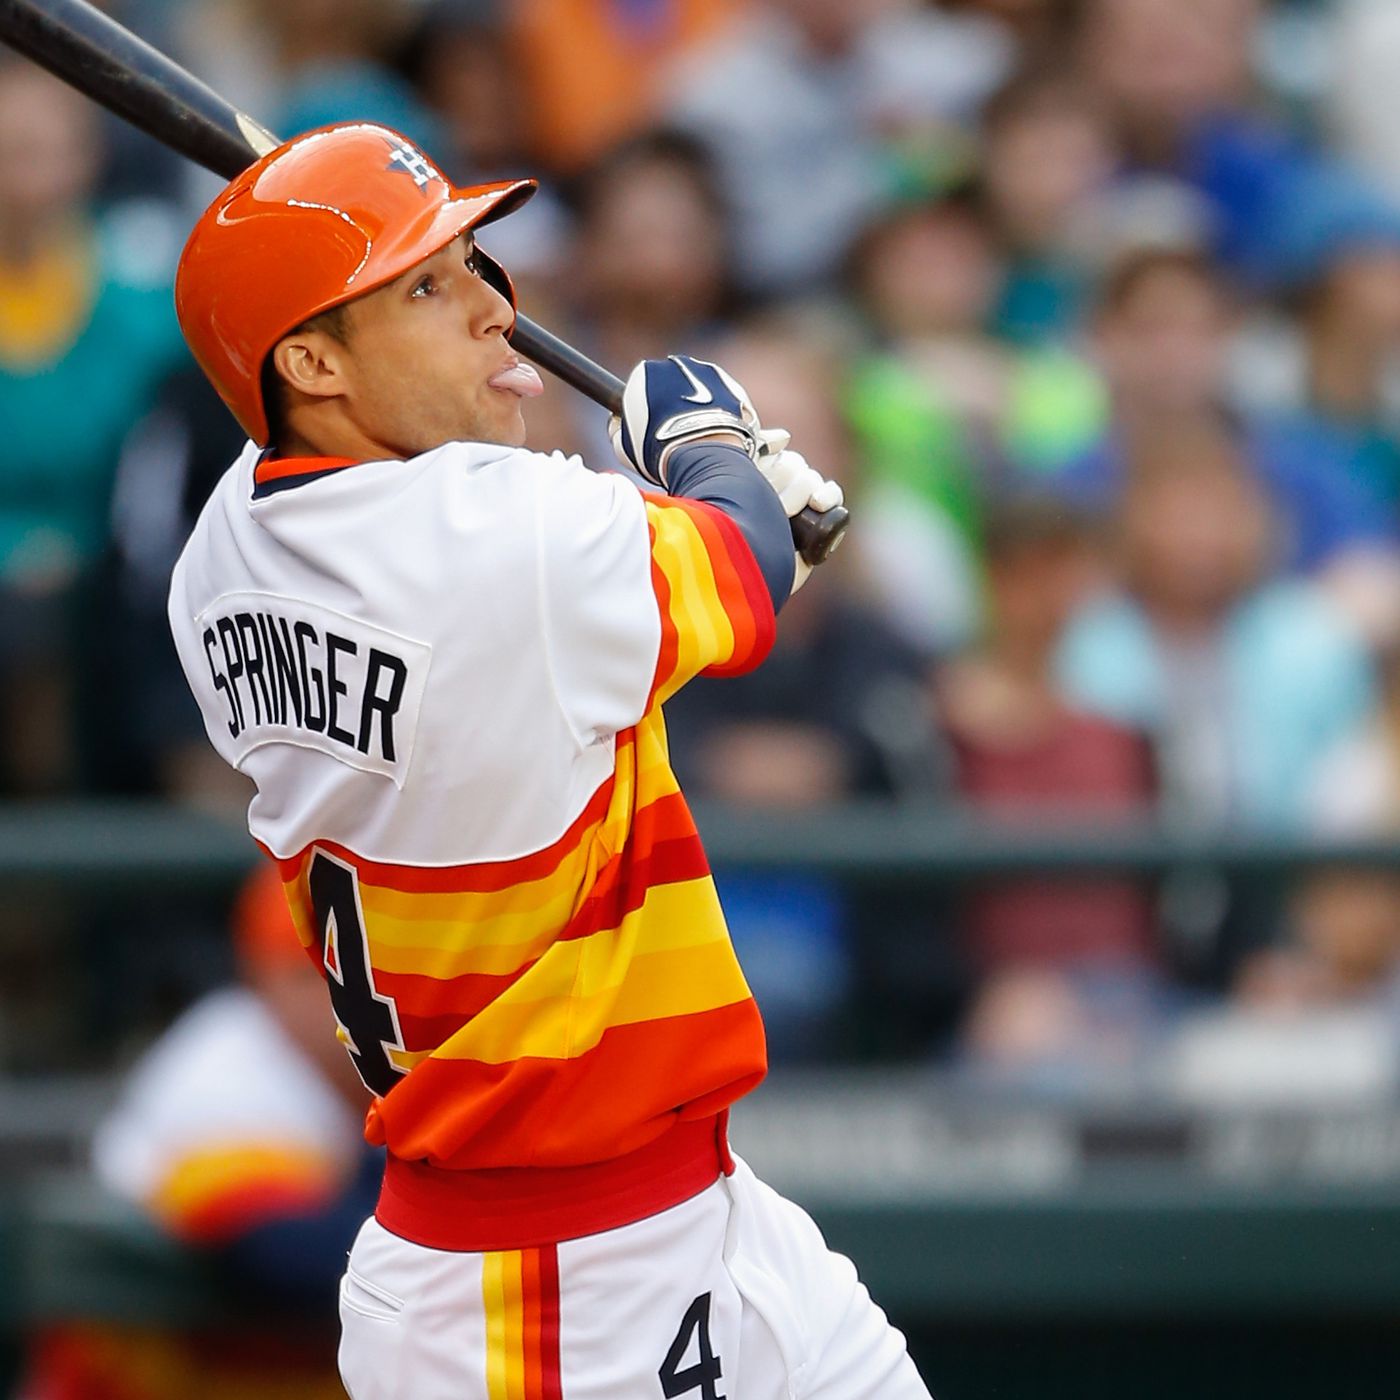 Astros news: George Springer, Astros on cover of this week's